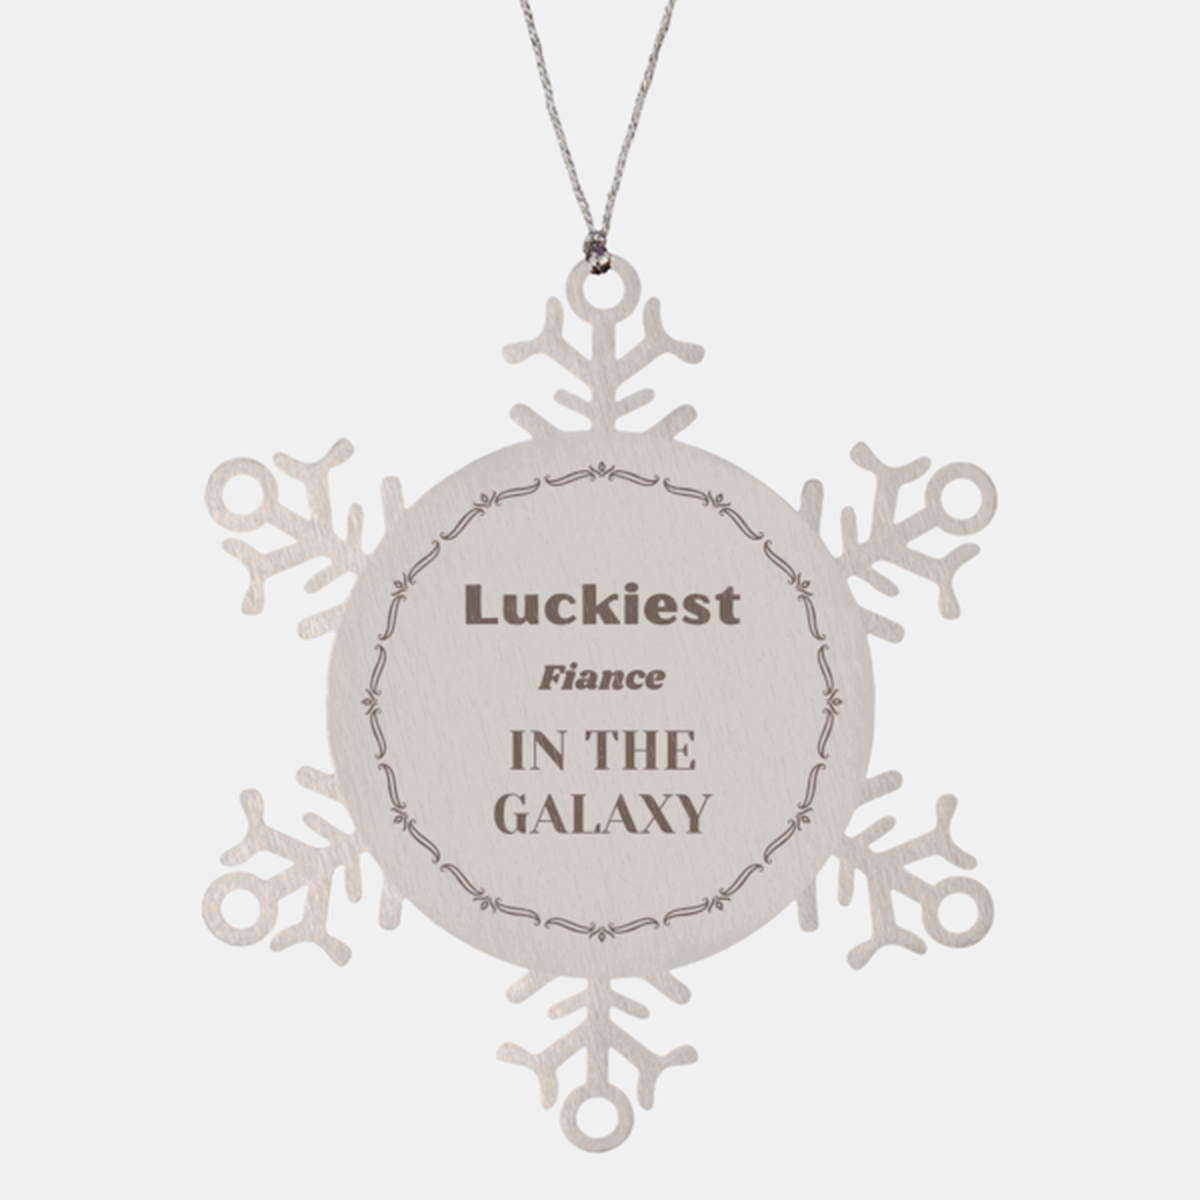 Luckiest Fiance in the Galaxy, To My Fiance Ornament Gifts, Christmas Fiance Snowflake Ornament Gifts, X-mas Decorations Unique Gifts For Fiance Men Women